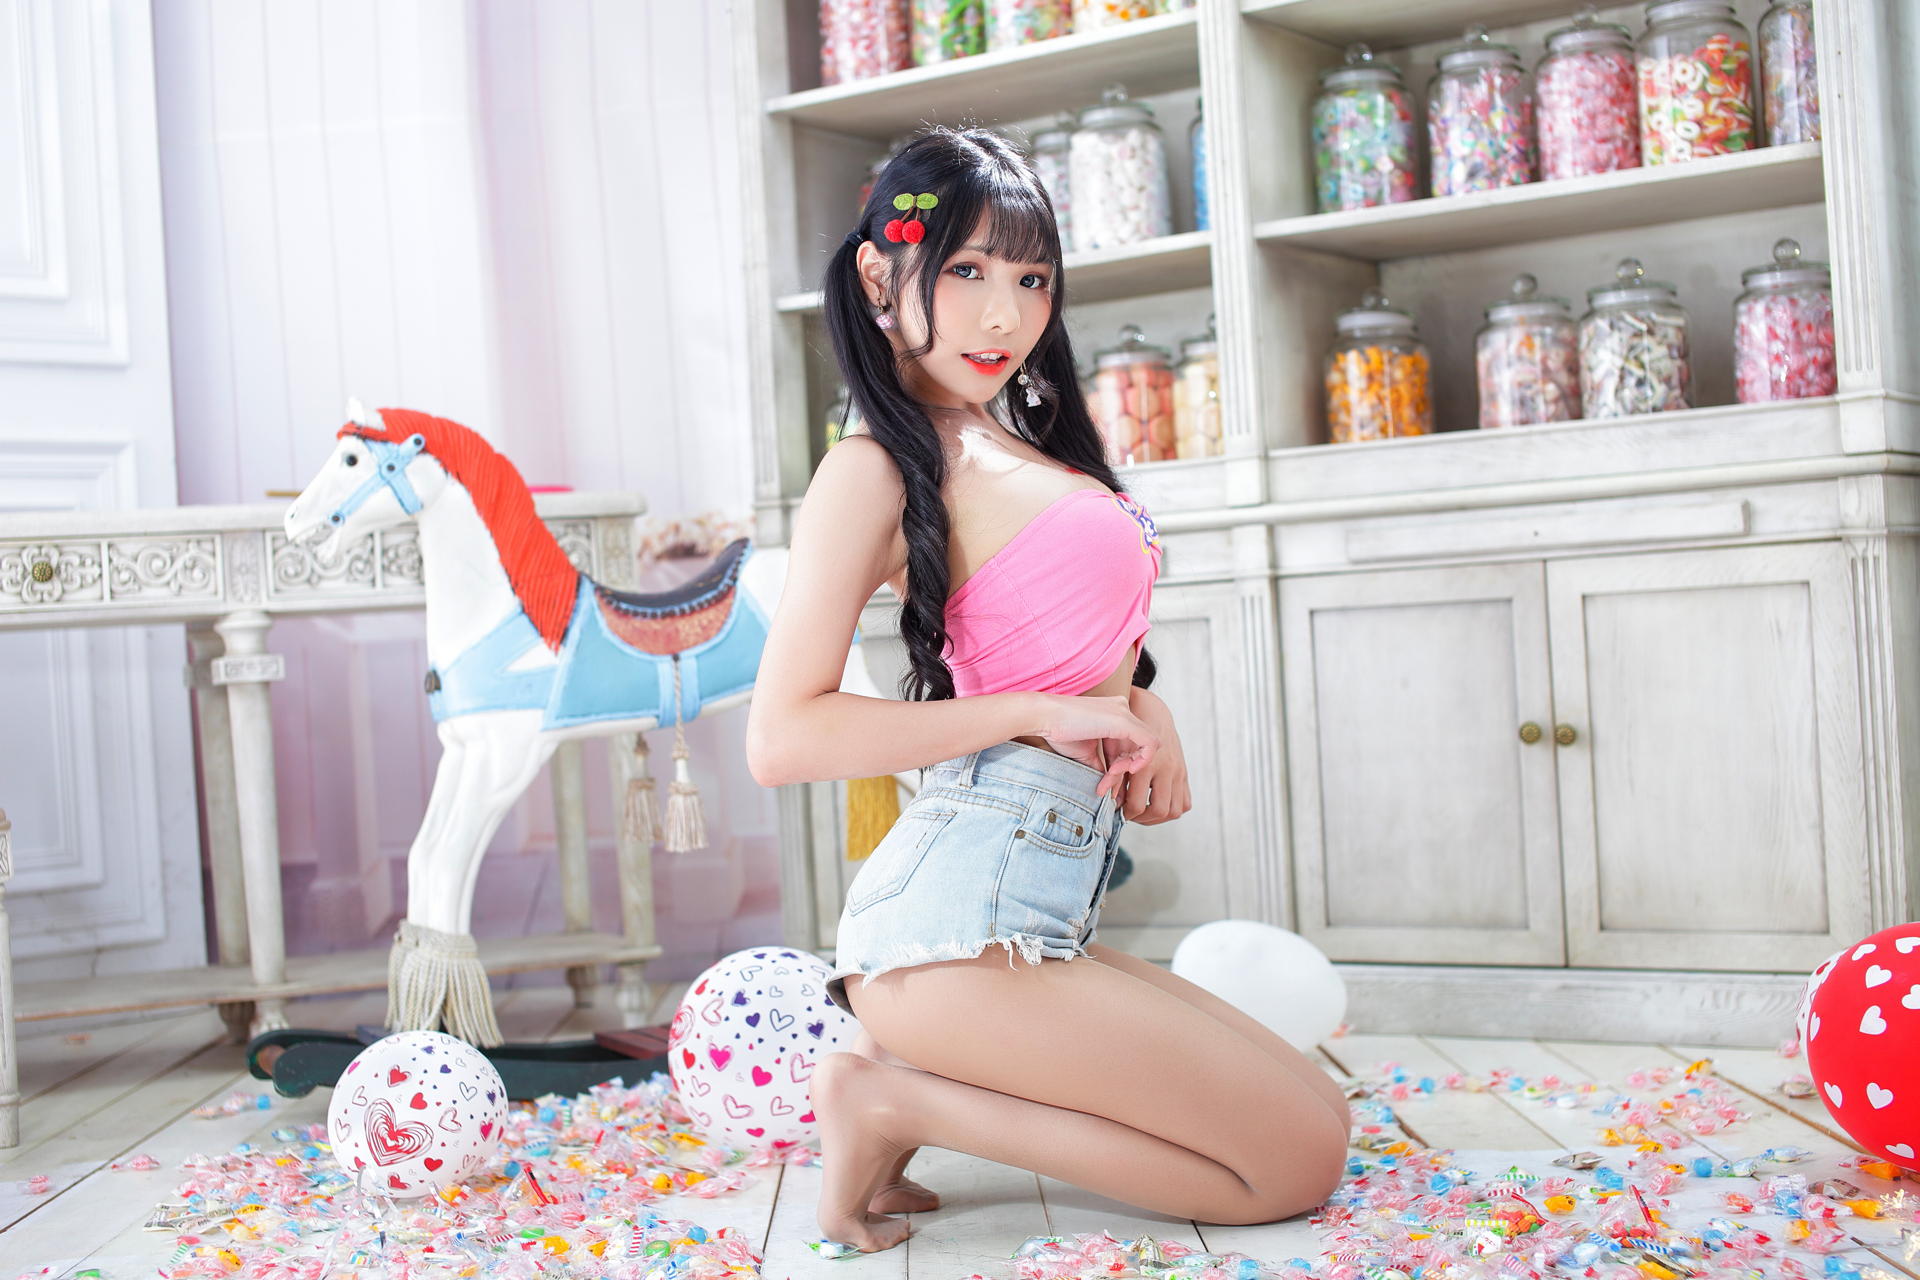 Asian Model Women Black Hair Long Hair Vicky Twintails Hair Ornament Toys Nylons Pink Tops Jars Cand 1920x1280